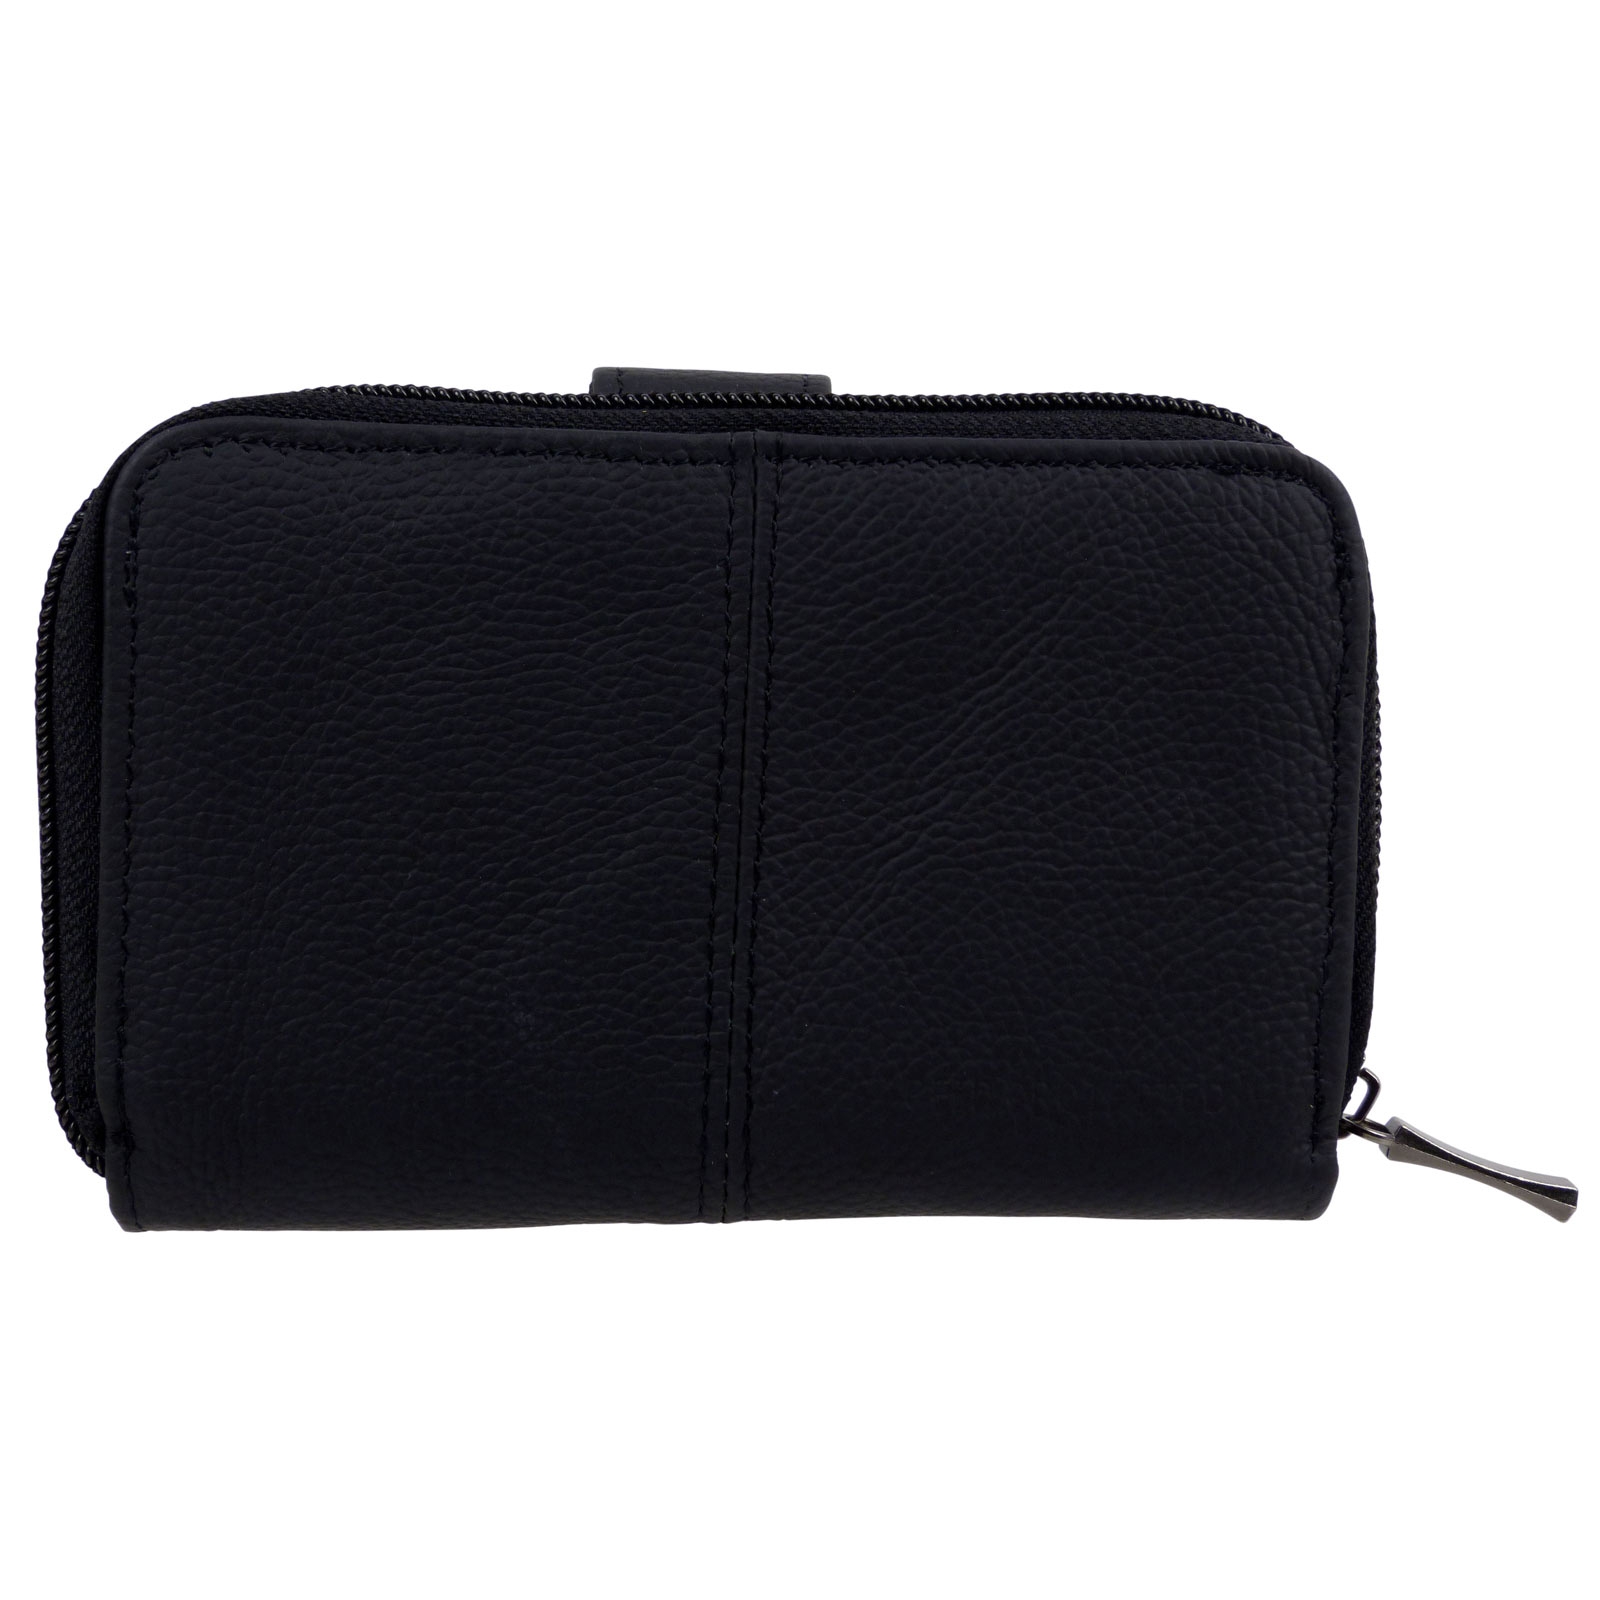 Soft Black Leather Lorenz Coin Purse with Keyring Zipped top & Pocket 